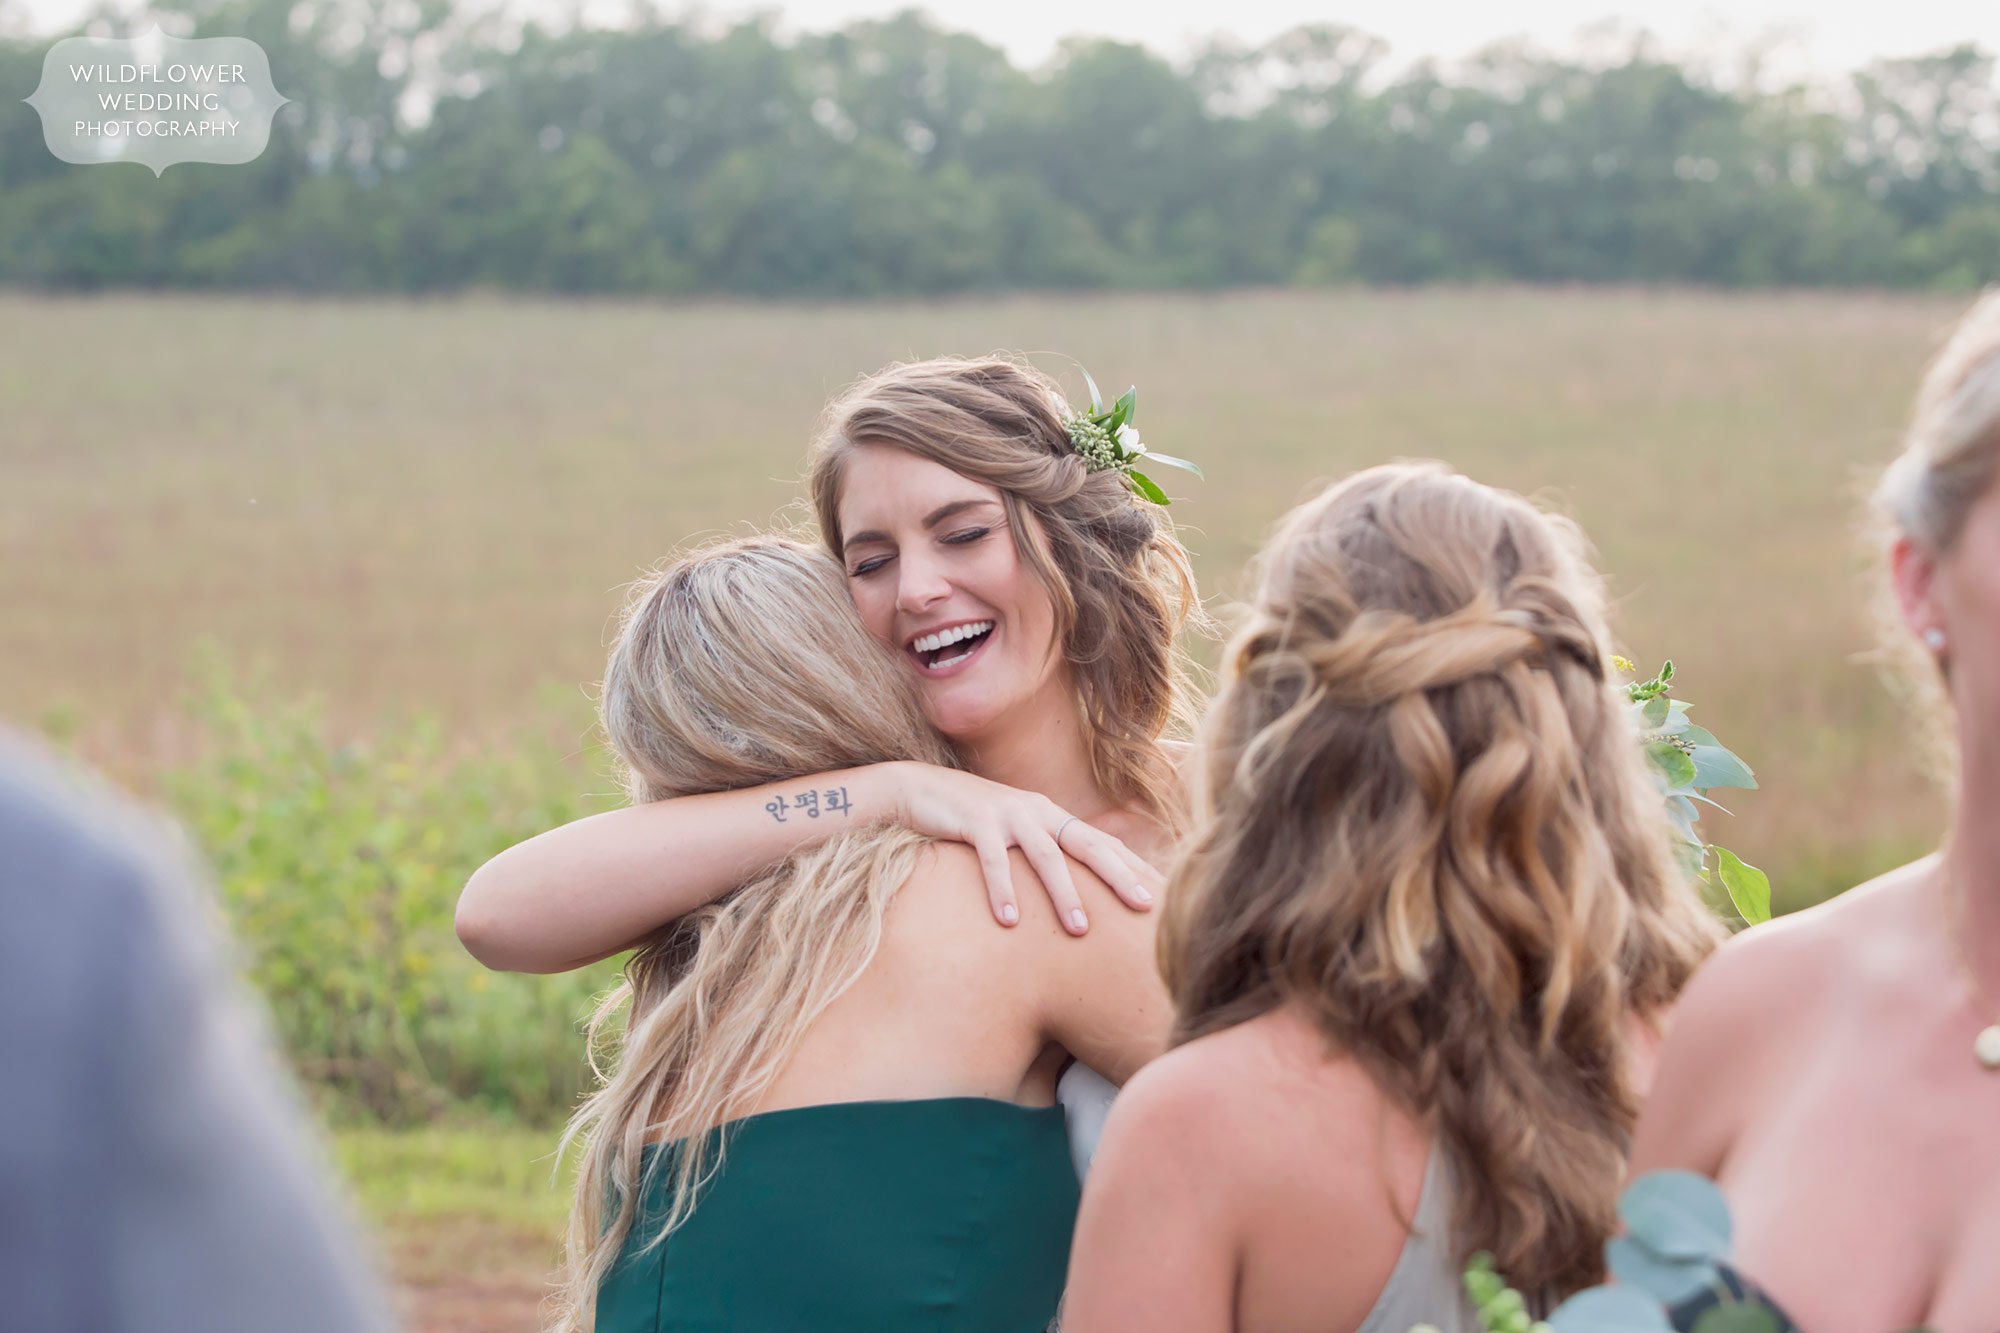 The happy bride is hugged and congratulated by her bridesmaid after the wedding ceremony.